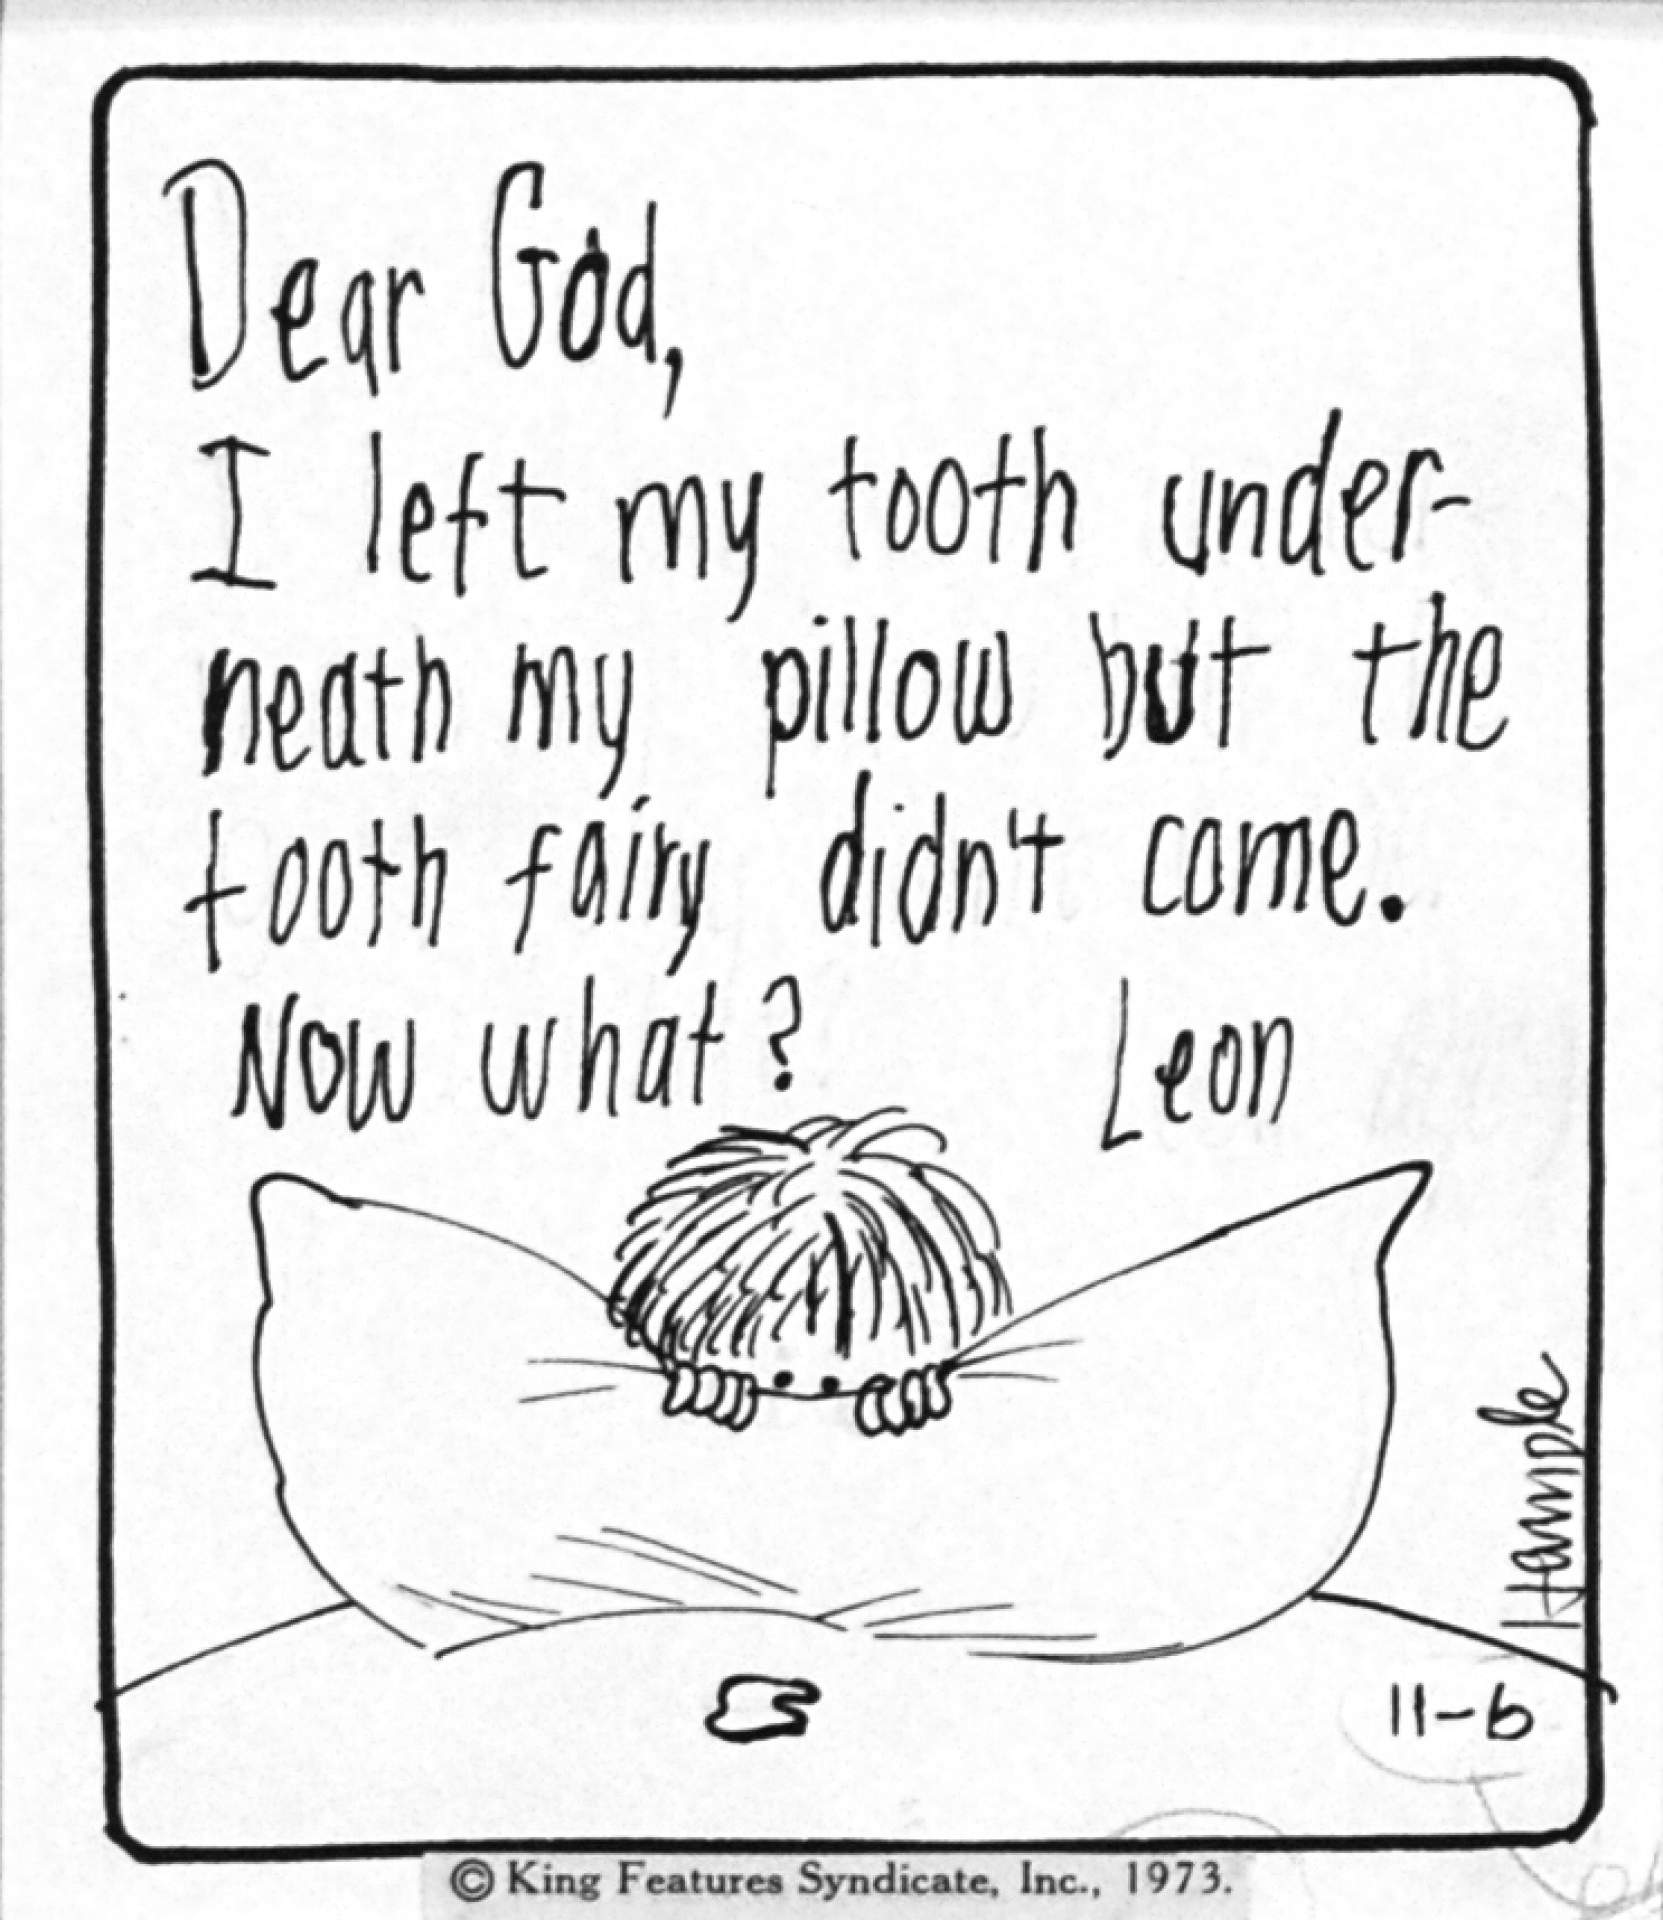 Untitled [Dear God, I left my tooth under my pillow but the tooth fairy didn't come. Now what? Leon]